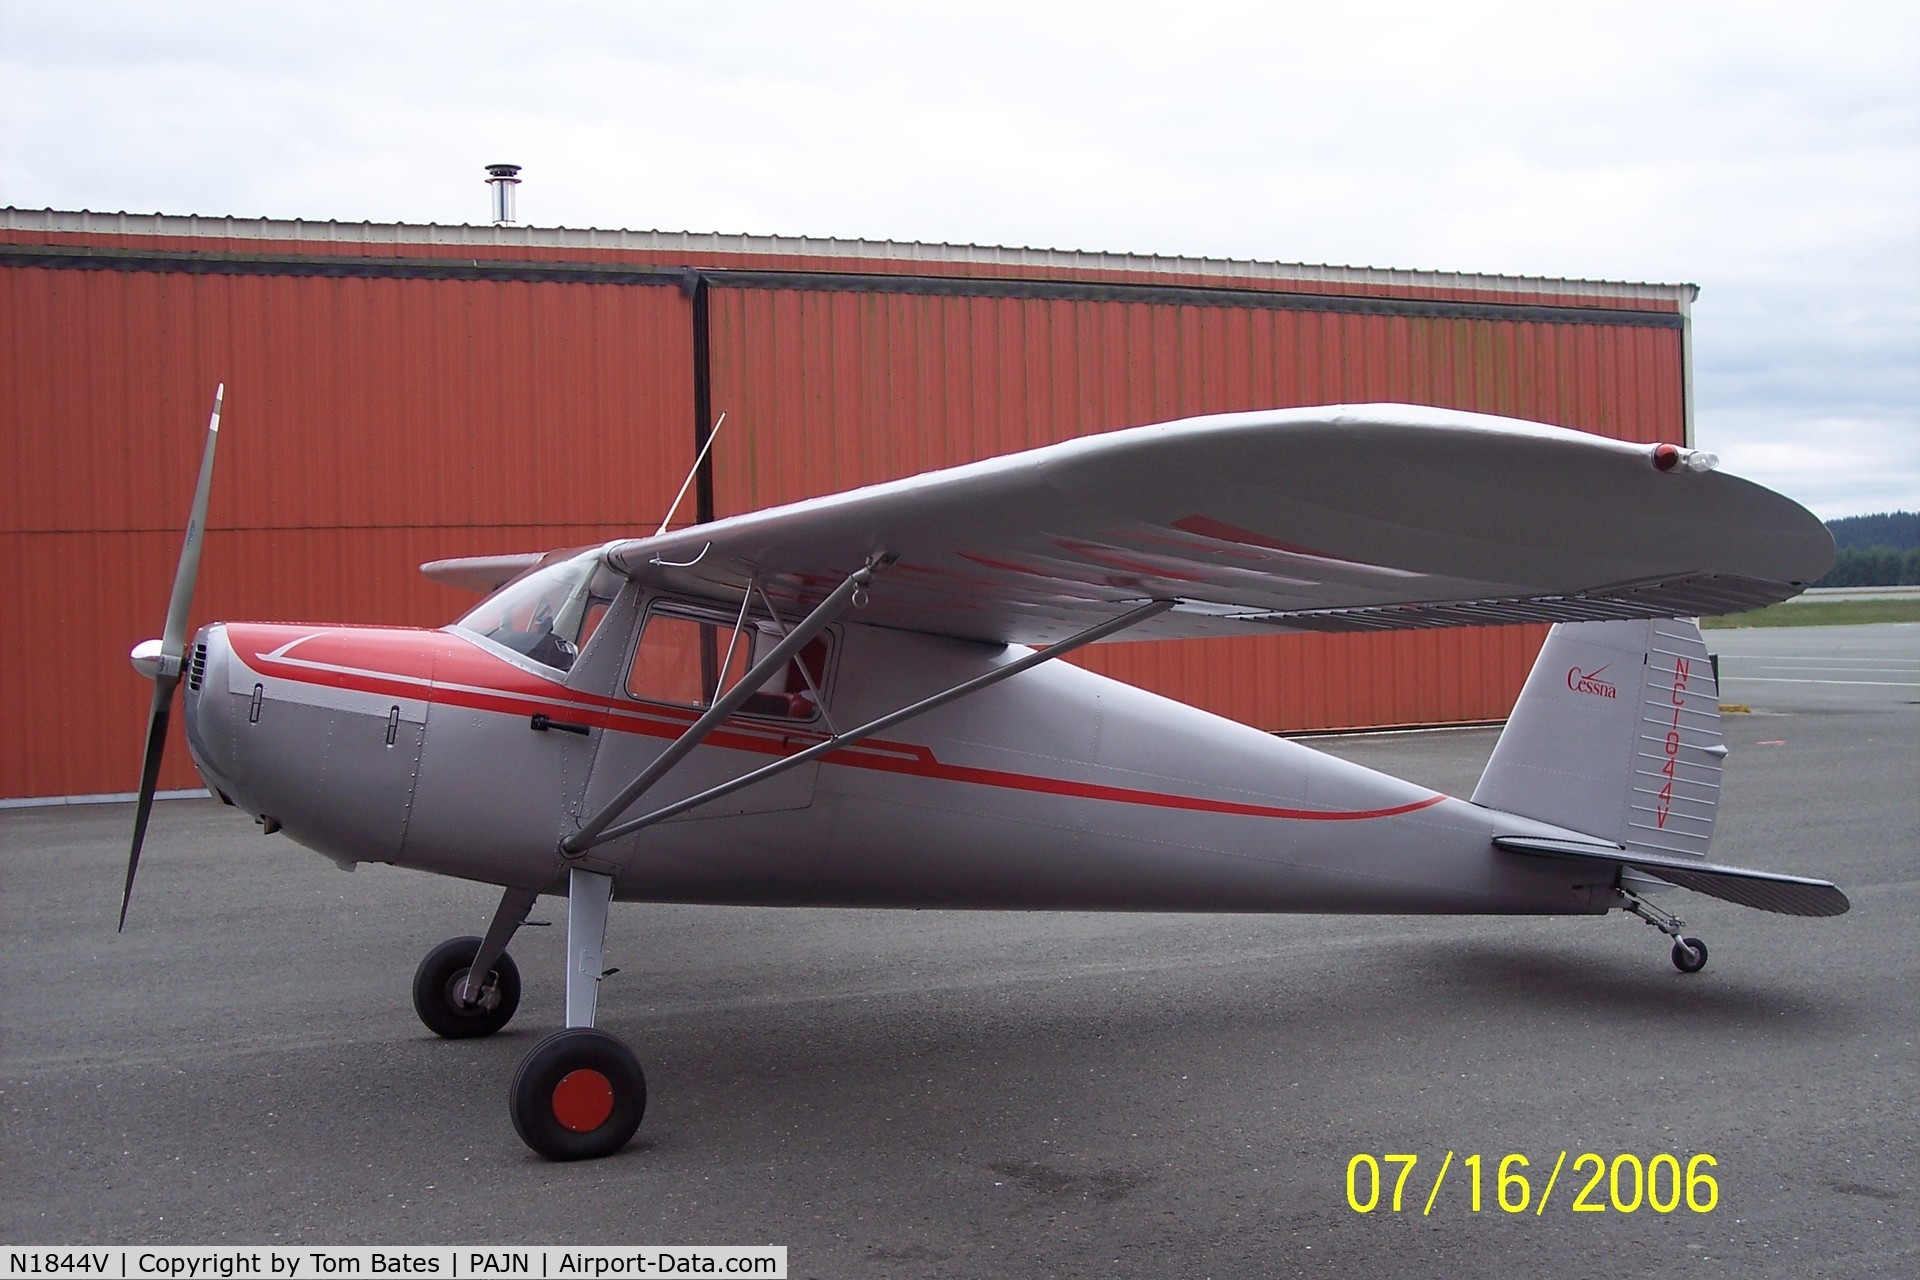 N1844V, 1947 Cessna 120 C/N 14102, Cesna 120 formerly based in Texas now in Alaska. It's a long trip at 90 knots